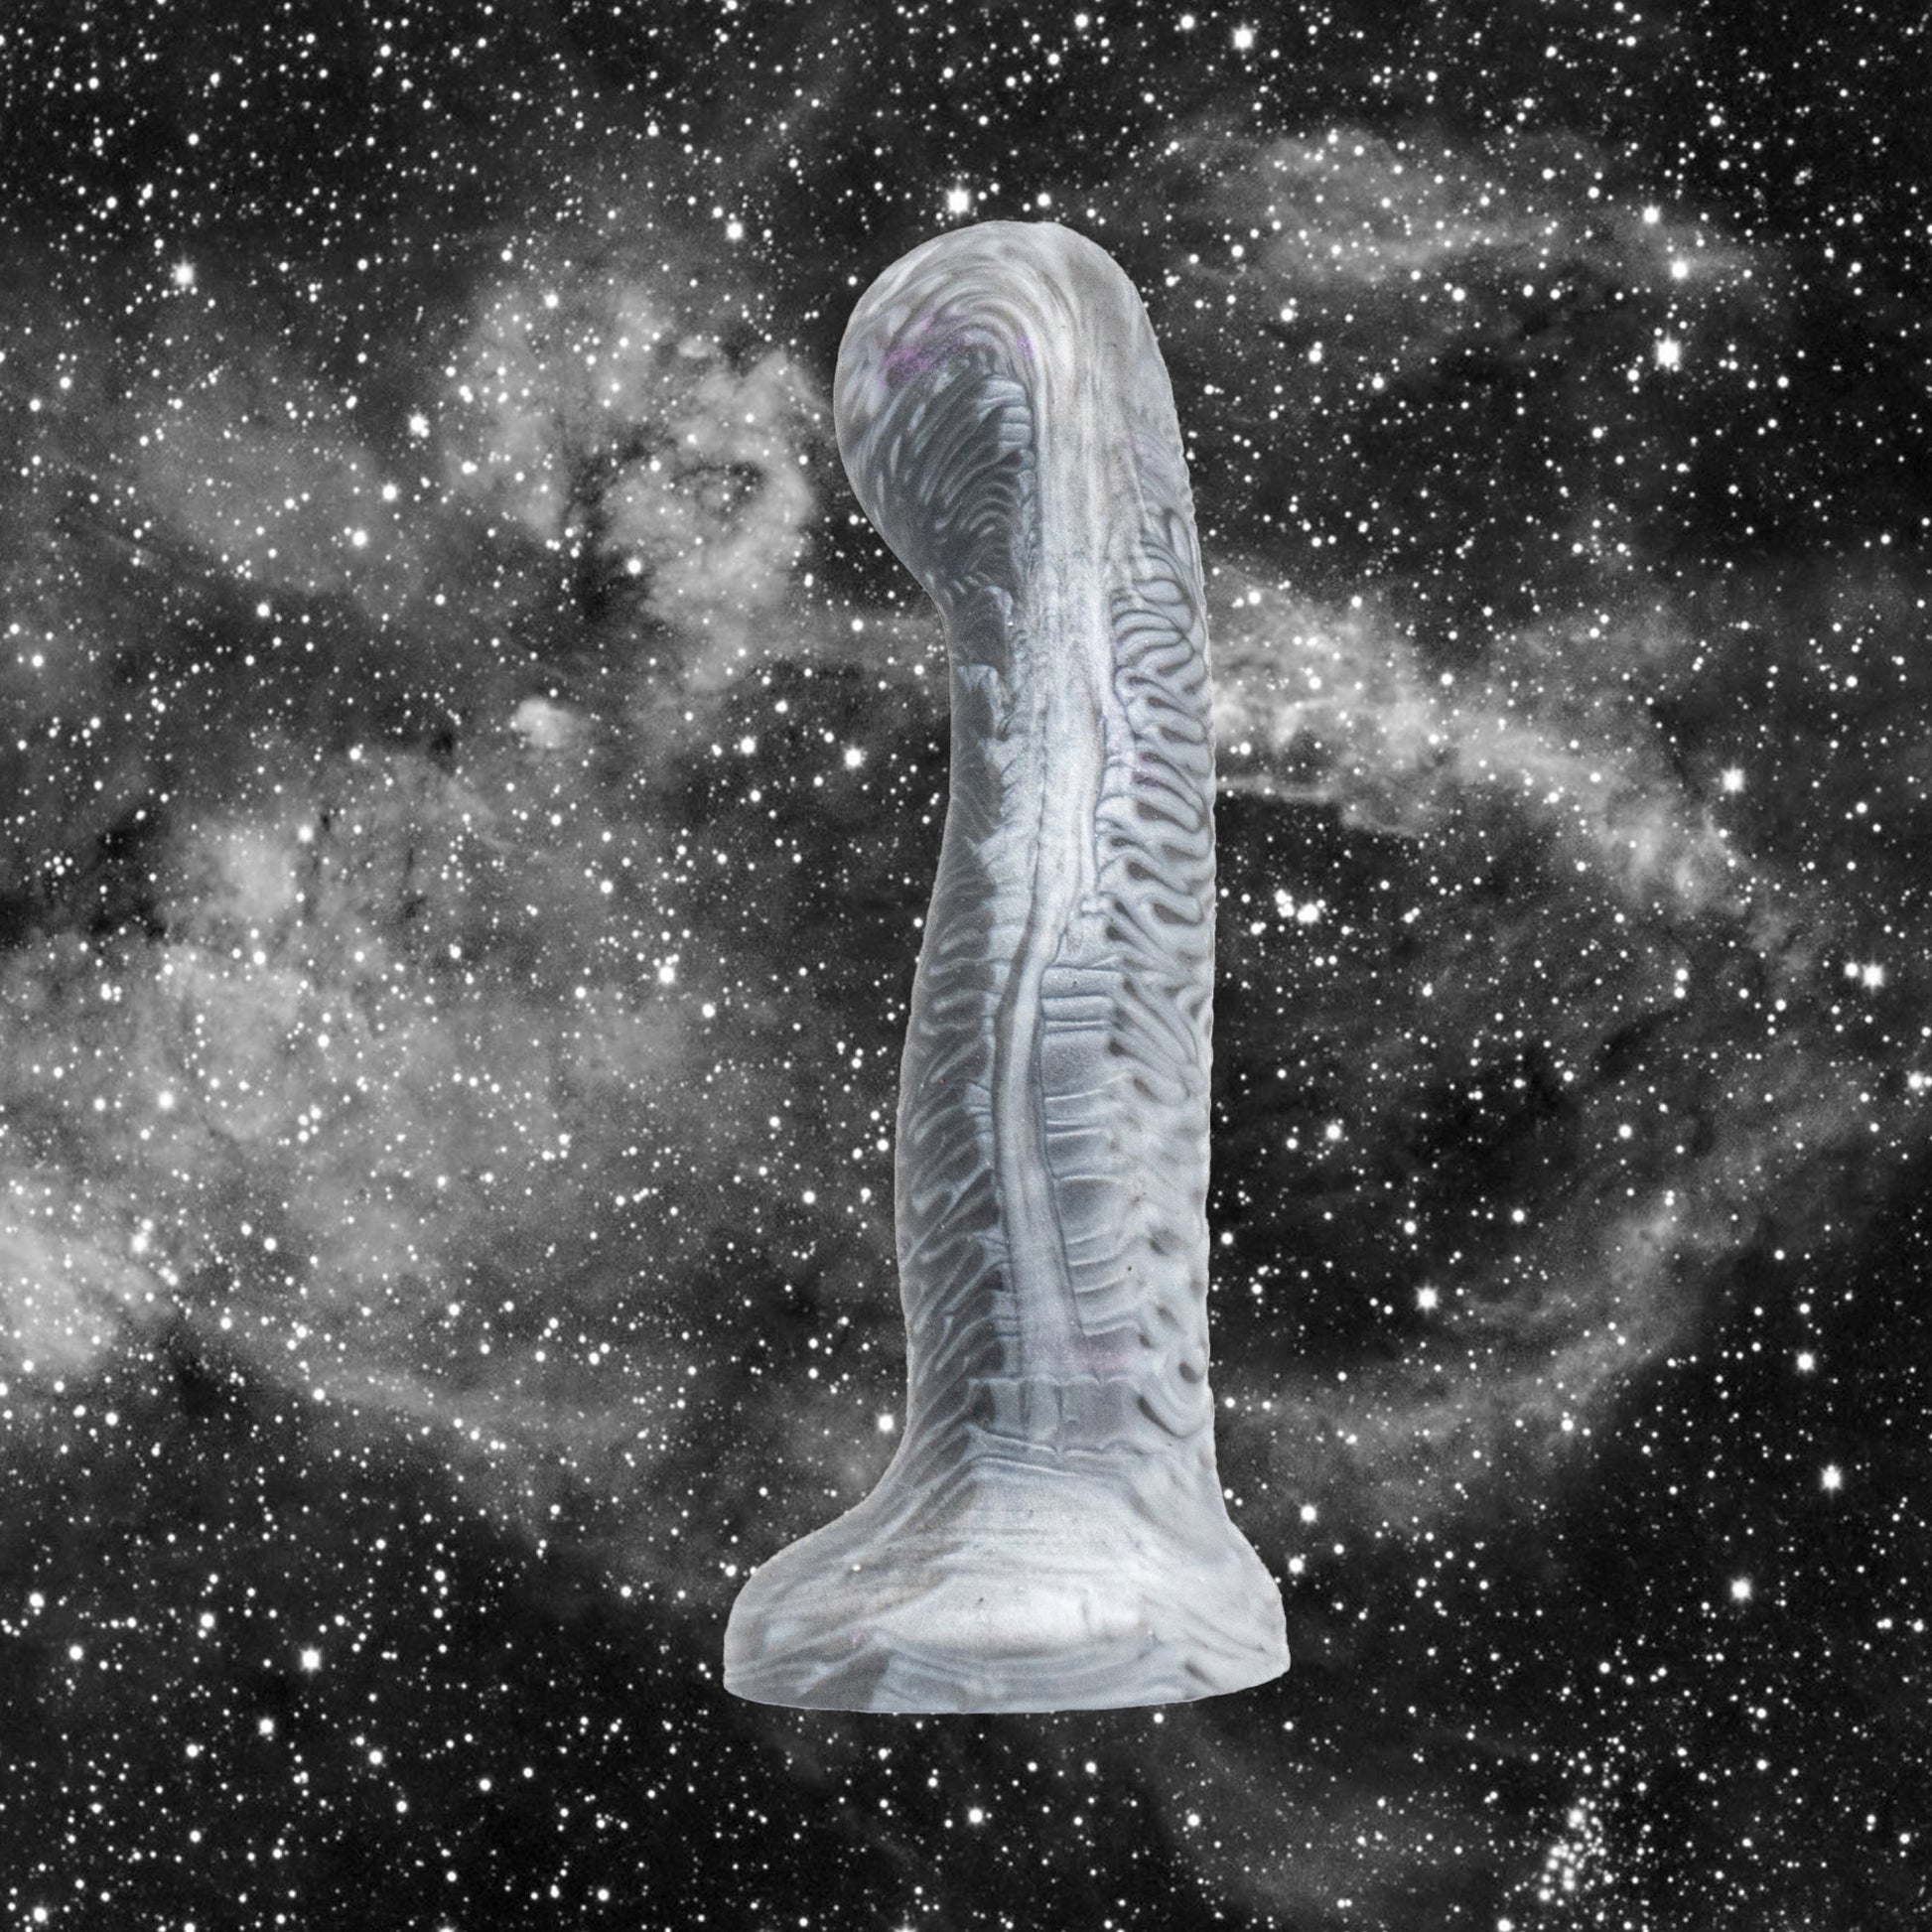 NOVUS is a fantasy dildo with a sleek, yet futuristic design. This fantasy dildo features a bulbous rounded tip that gradually contours into a thinner upper shaft, before flaring out into a gentle knot.